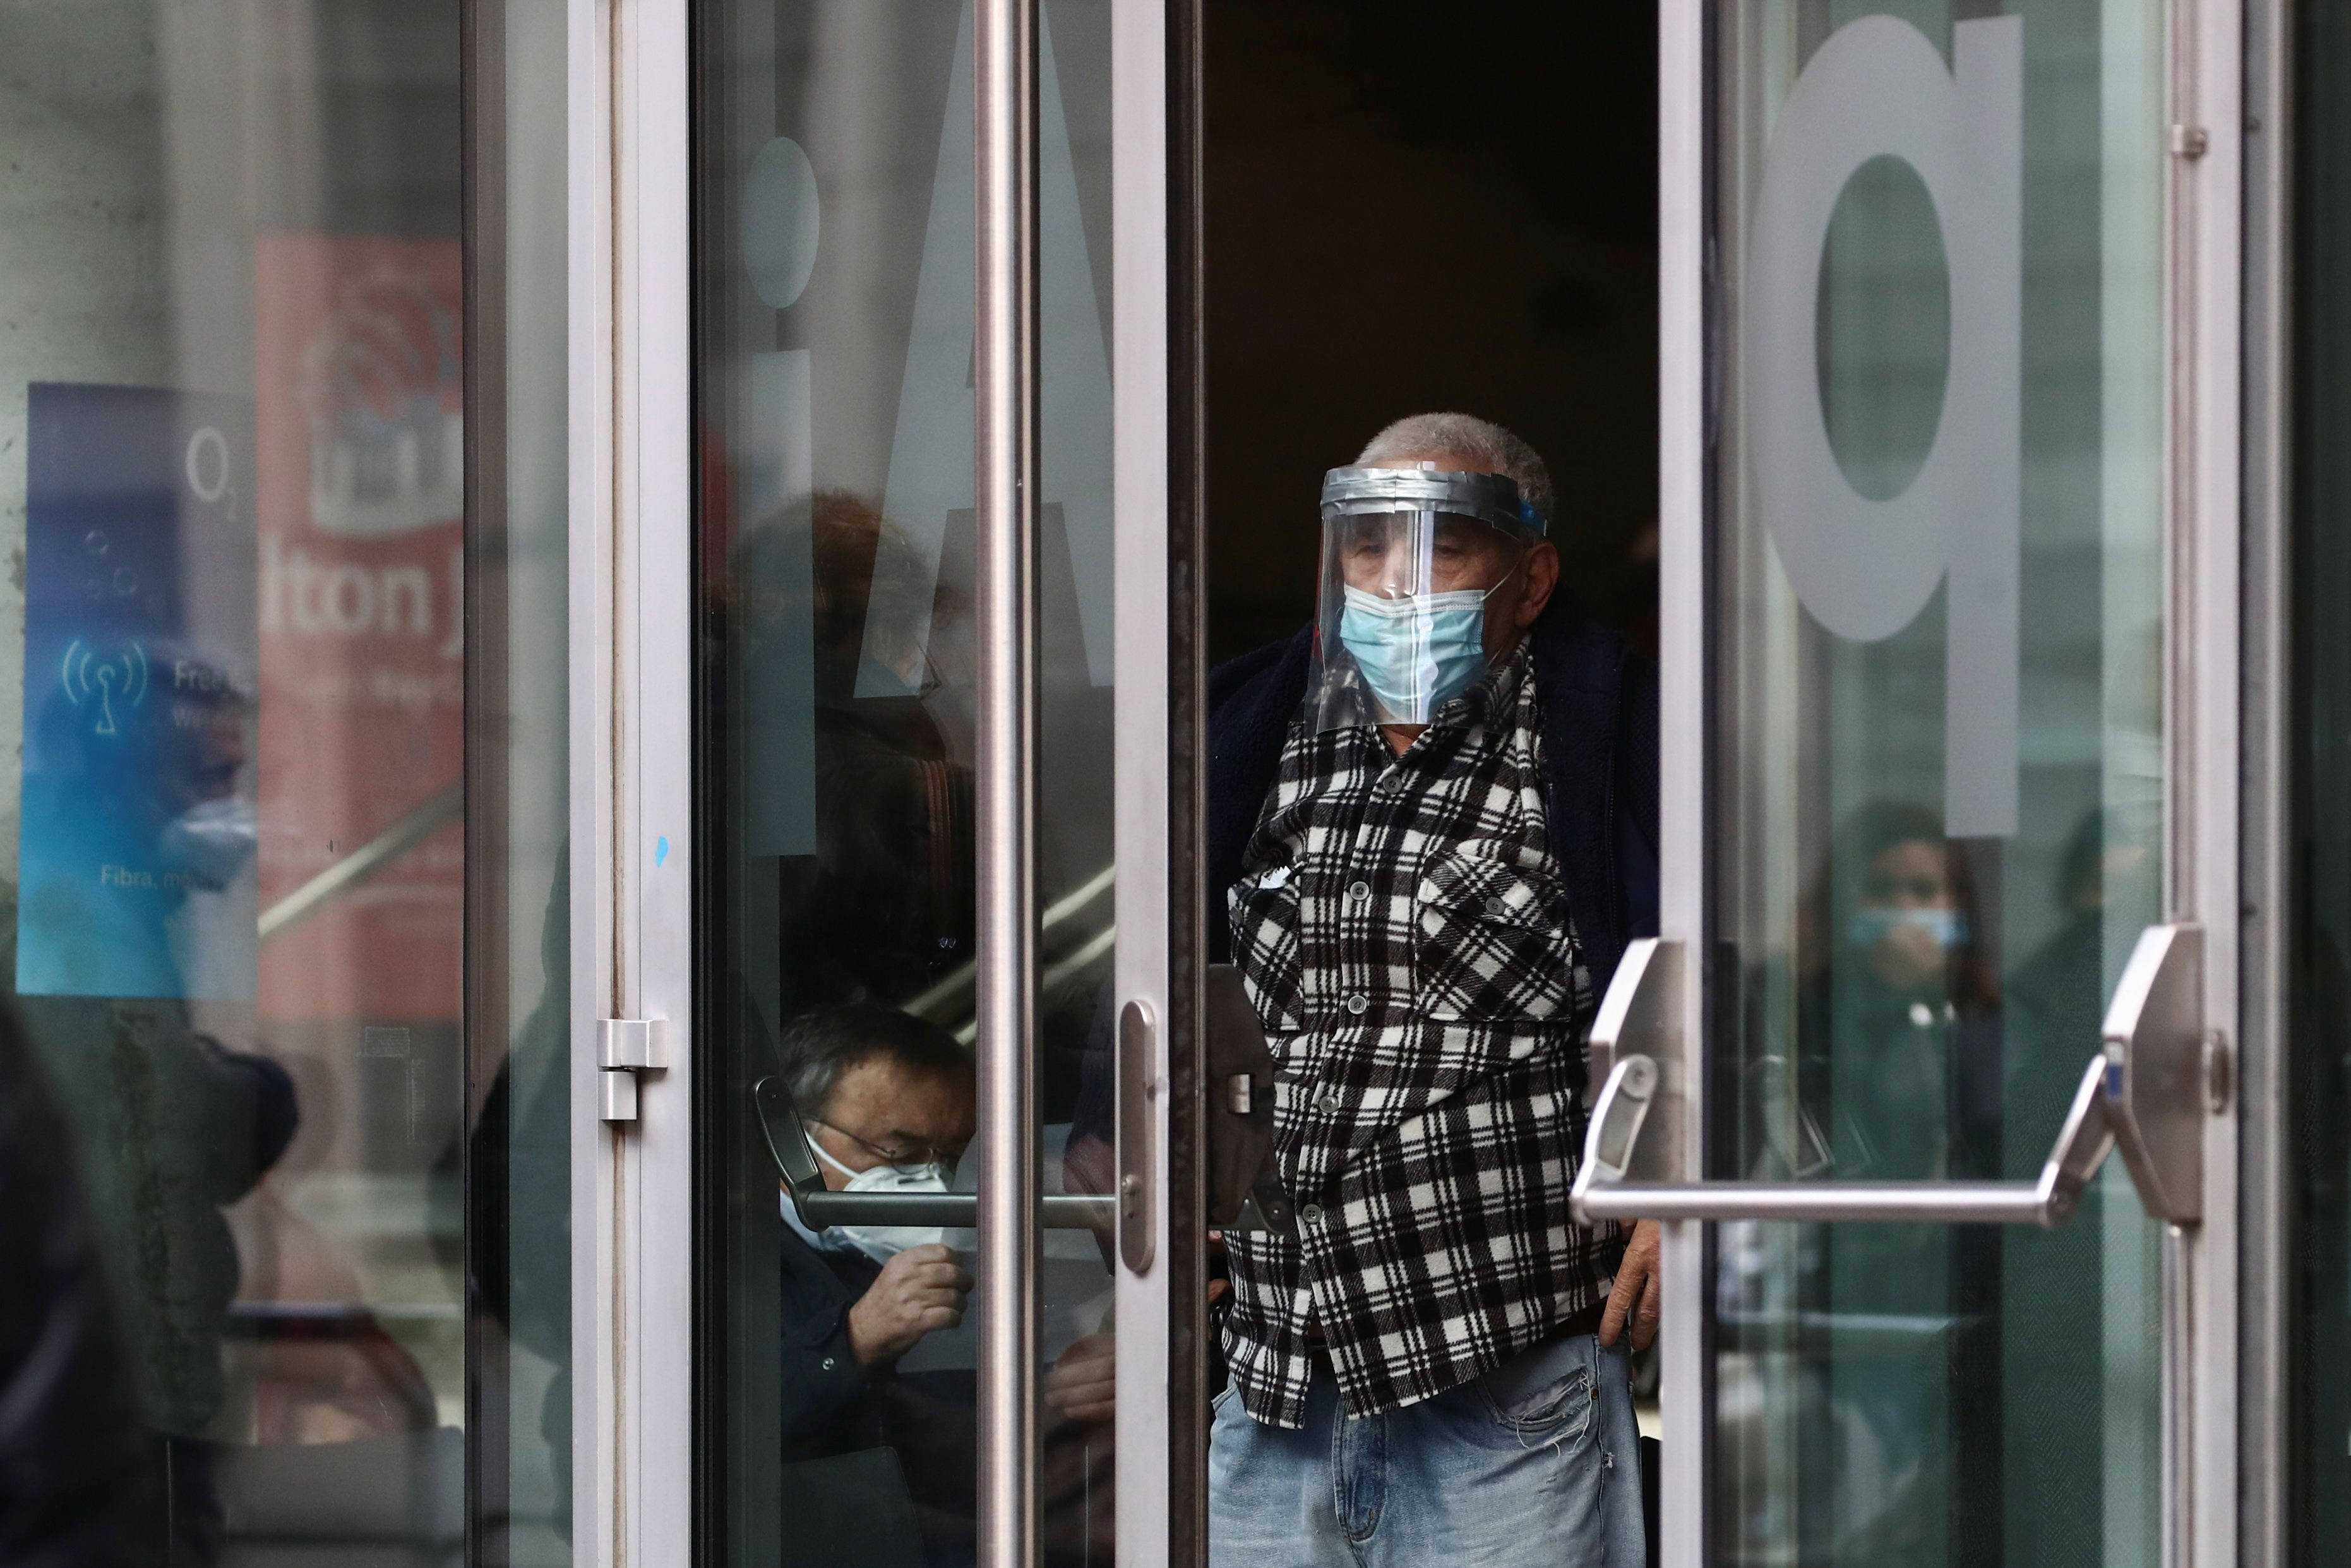 A man wearing a protective face shield and a mask stands at an entrance, after getting his dose of coronavirus disease (COVID-19) vaccine at a vaccination centre in Madrid, Spain, November 24, 2021. REUTERS/Sergio Perez